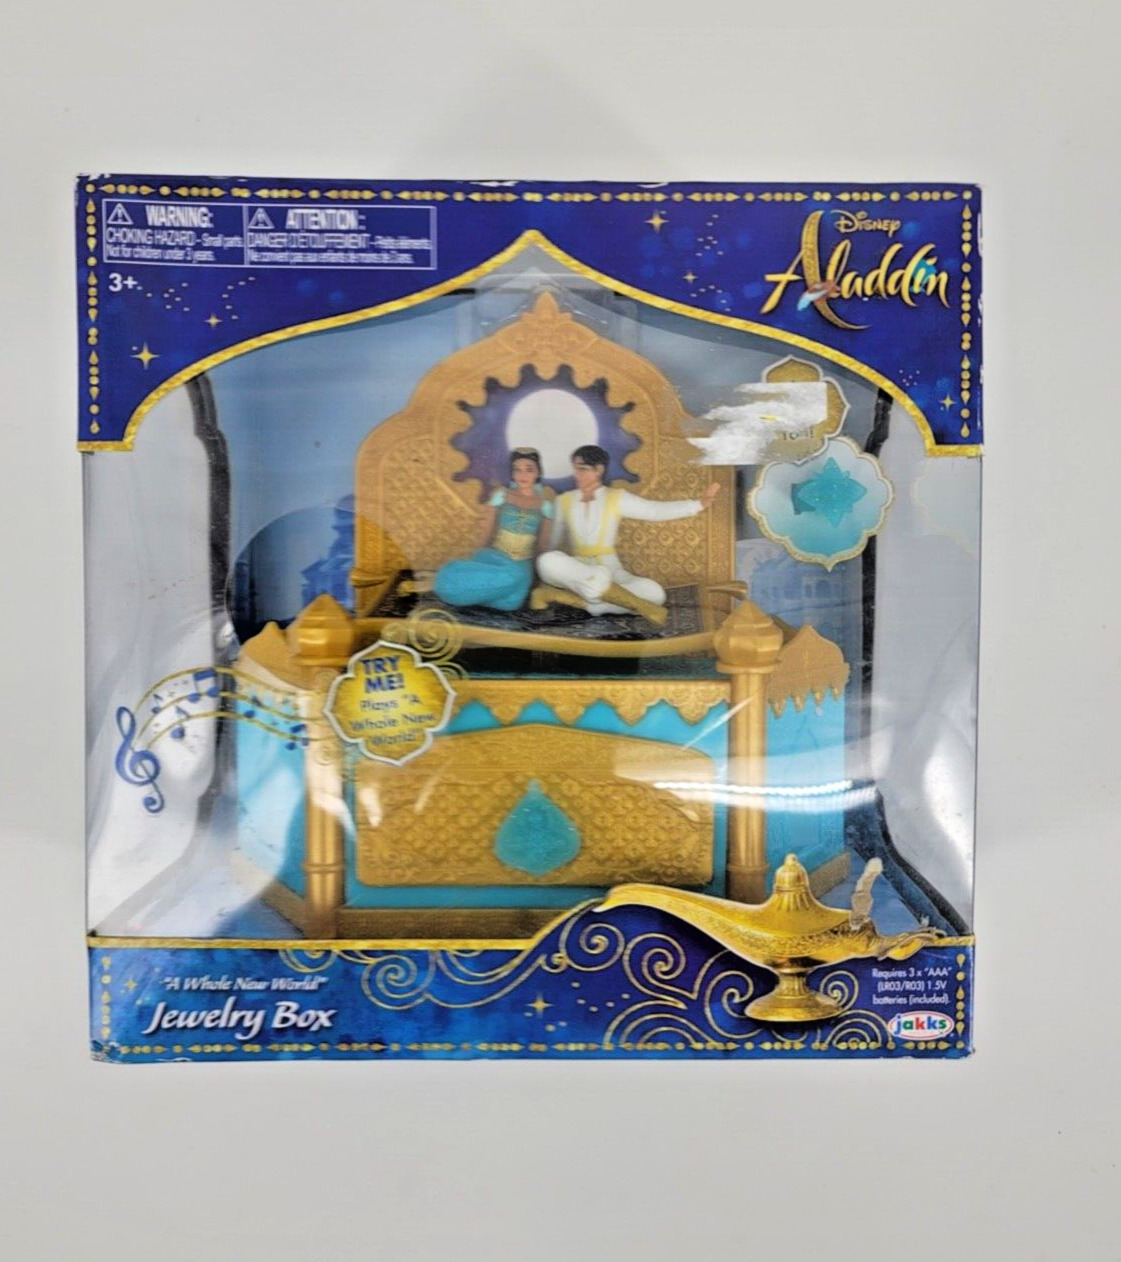 Disney Aladdin A Whole New World Musical Girls Jewelry Box with Ring NEW Sealed